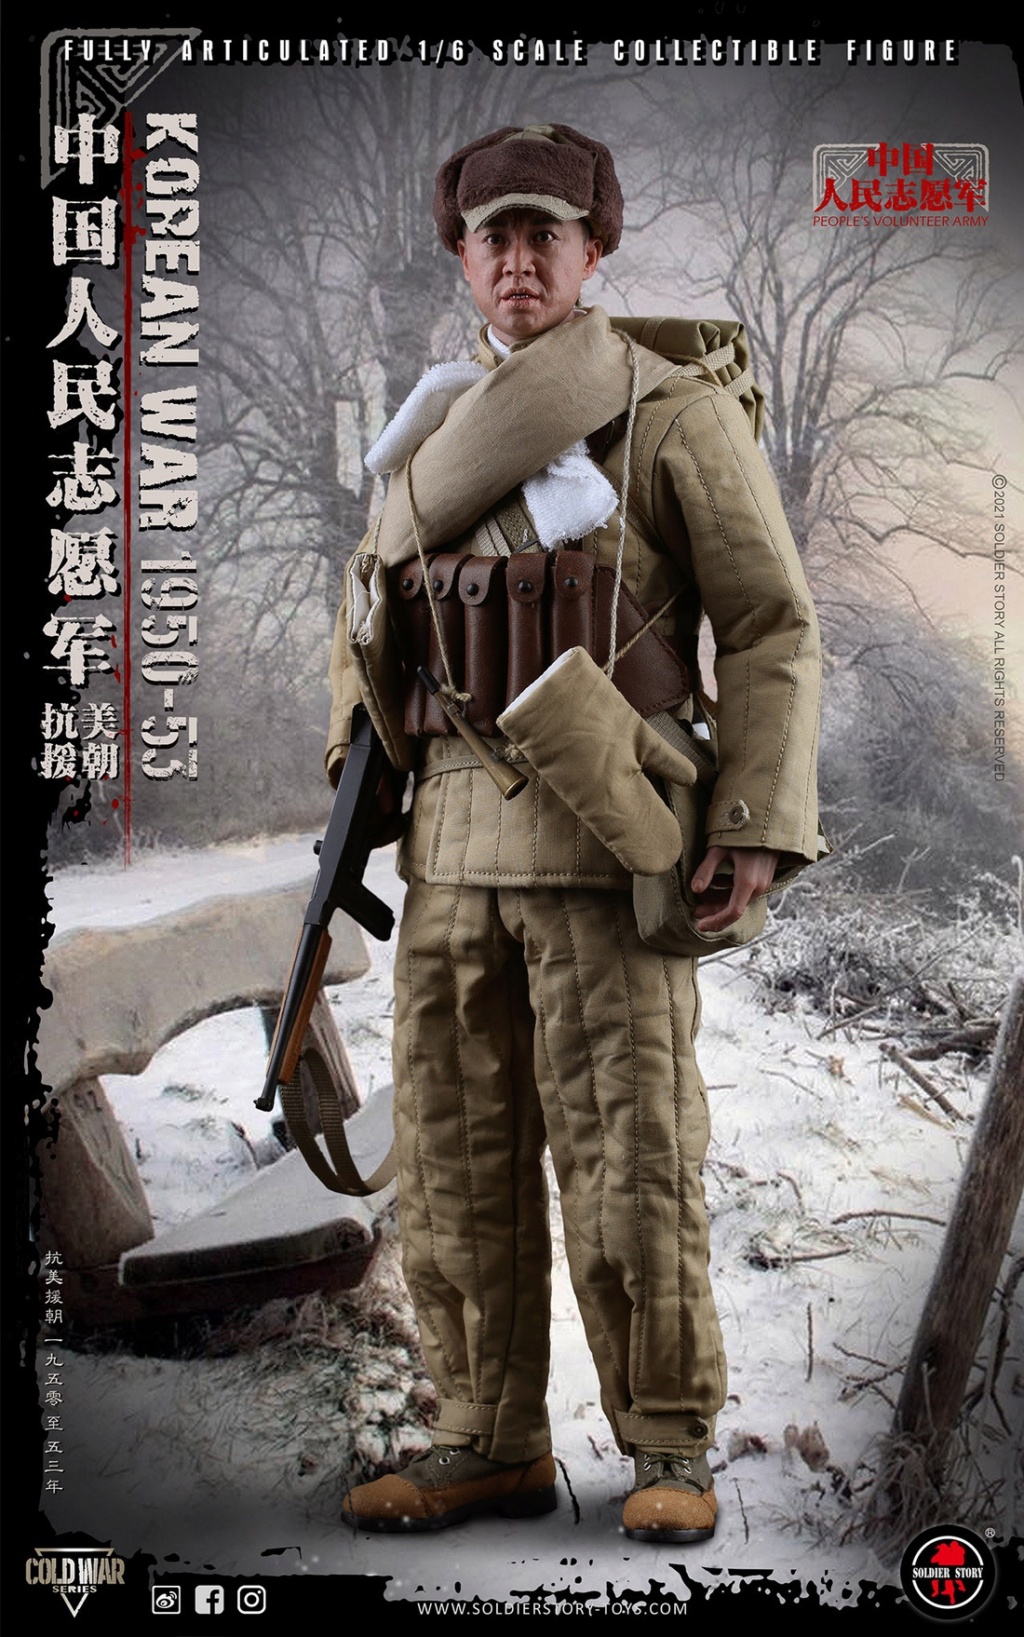 Soldierstory - NEW PRODUCT: SOLDIER STORY: 1/6 Chinese People’s Volunteers 1950-53 Collectible Action Figure (#SS-124) Febd6910